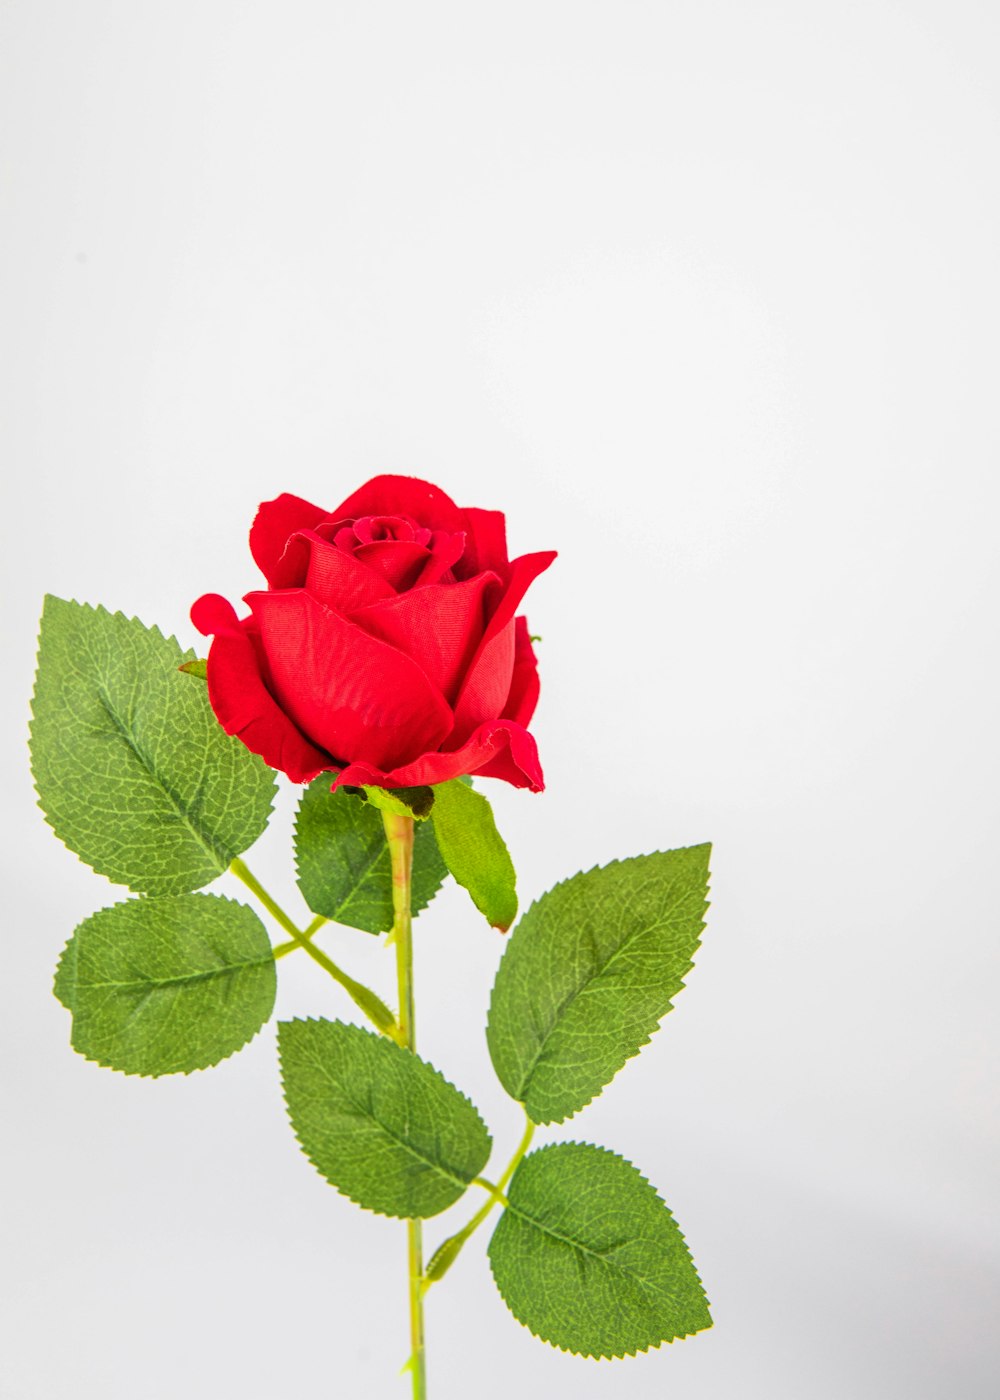 a single red rose with green leaves on a white background